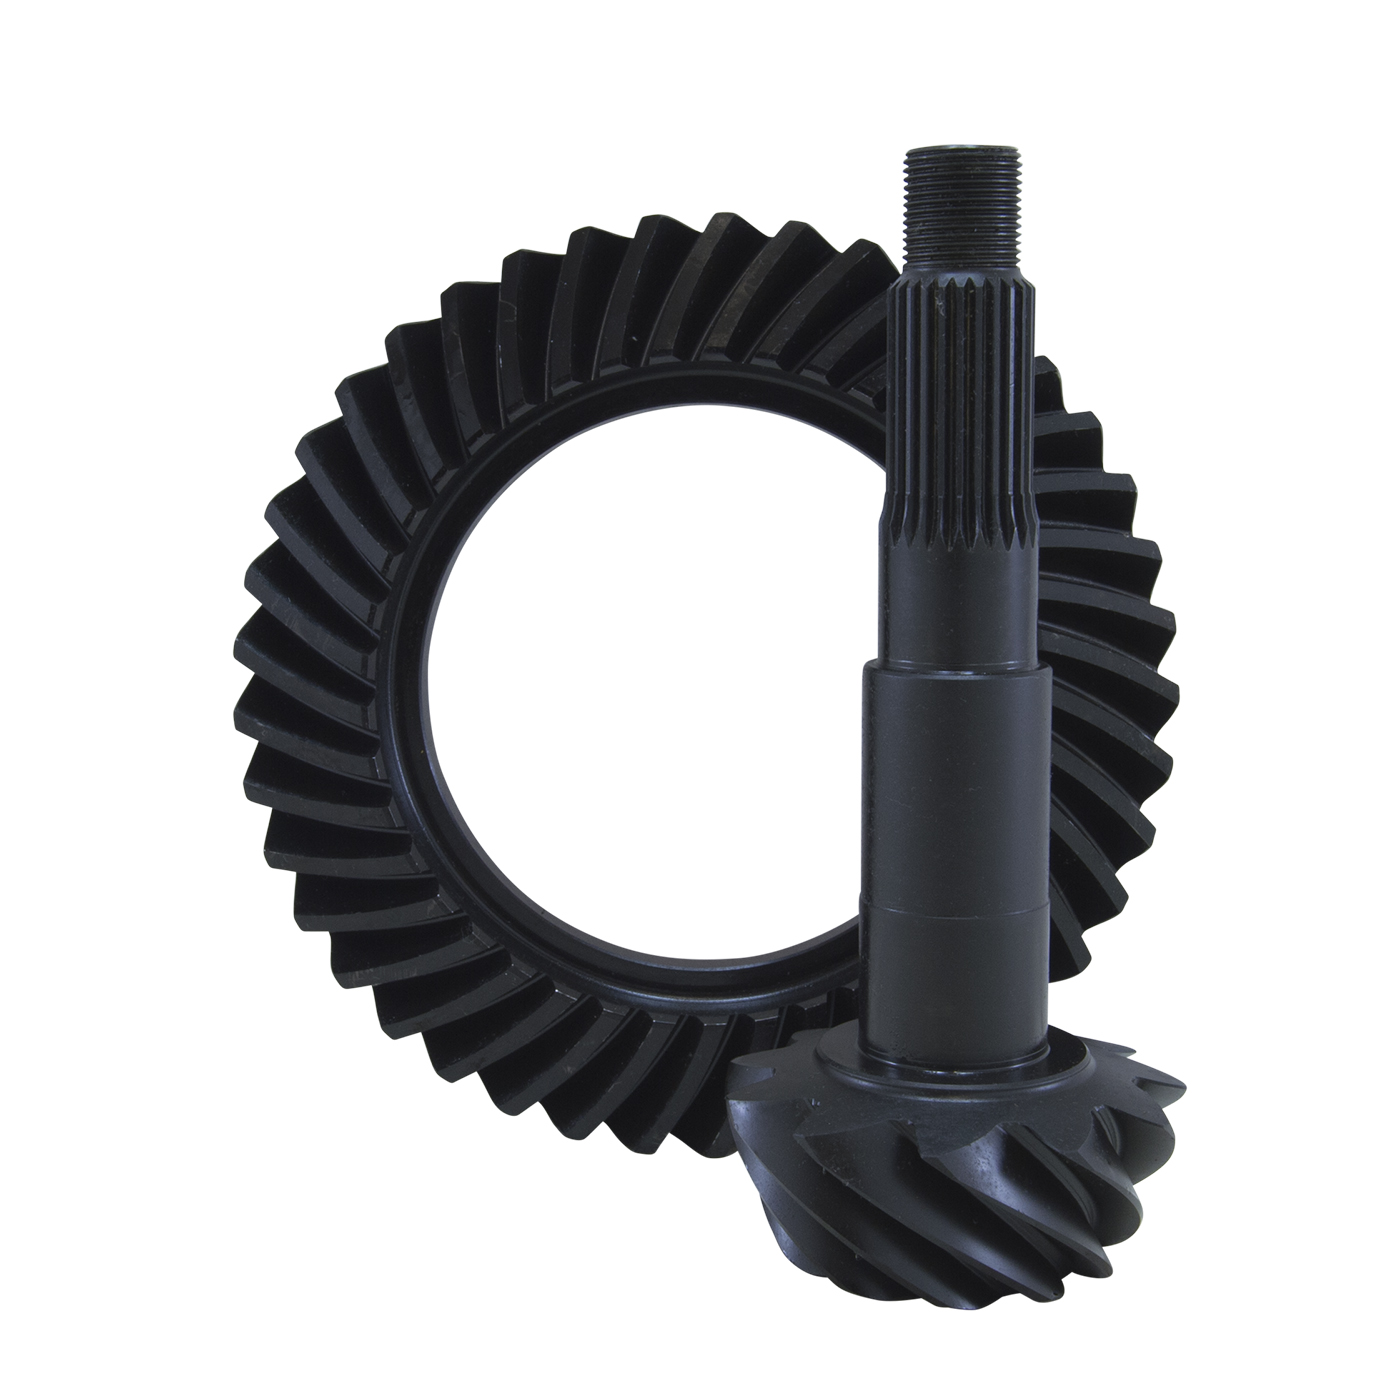 USA Standard Ring & Pinion "thick" gear set for GM 12 bolt car in a 4.11 ratio